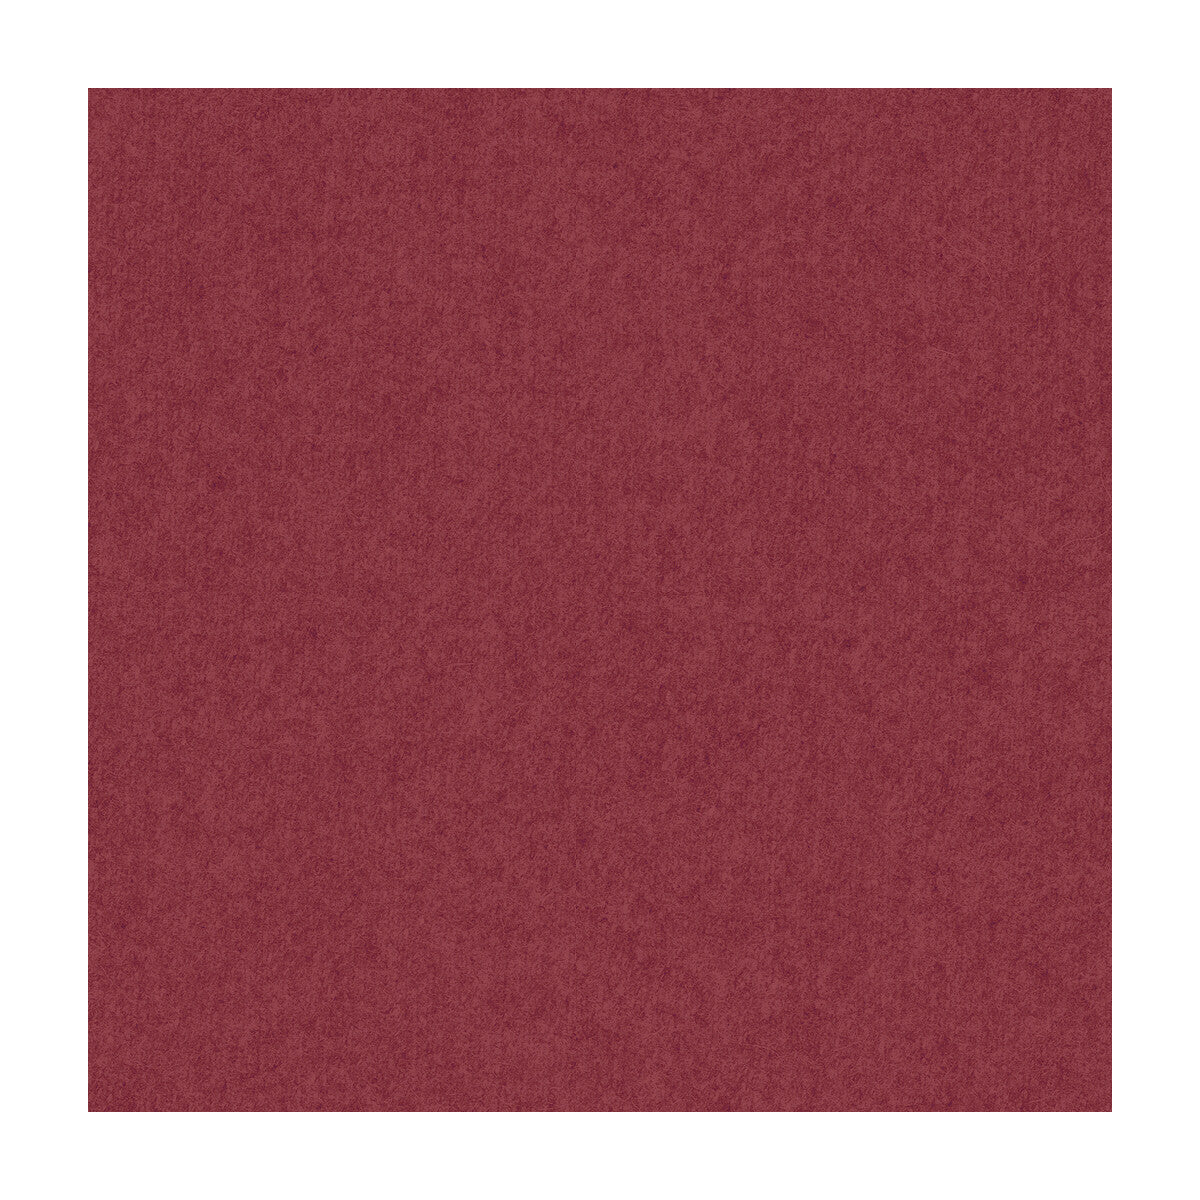 Jefferson Wool fabric in cranberry color - pattern 34397.9.0 - by Kravet Contract